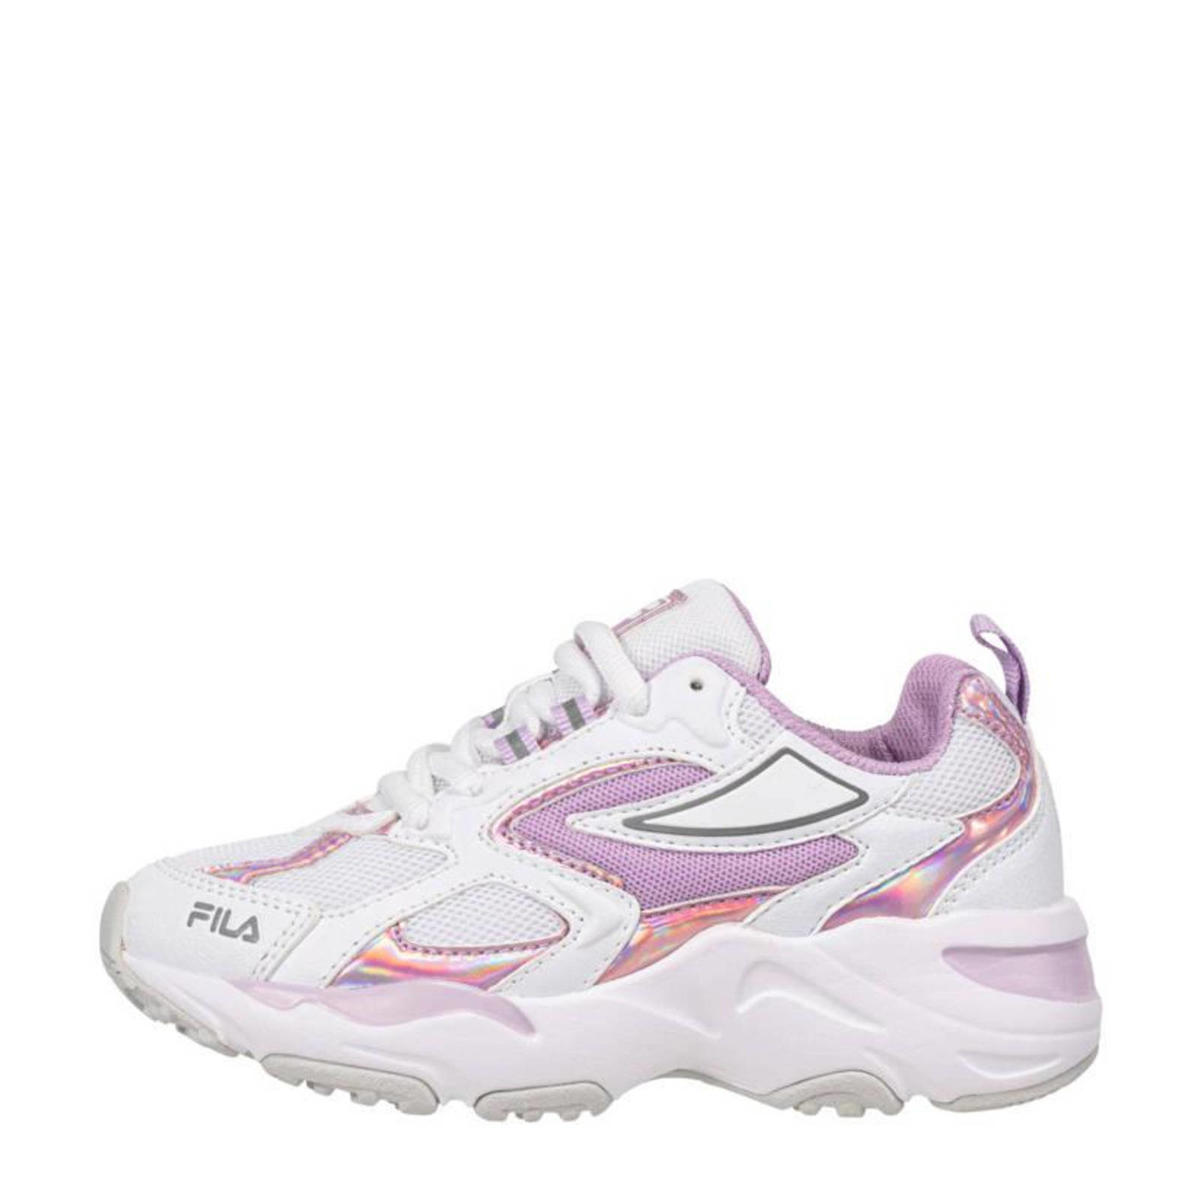 Excentriek peper Circulaire Fila Ray Tracer Teens sneakers wit/roze | kleertjes.com